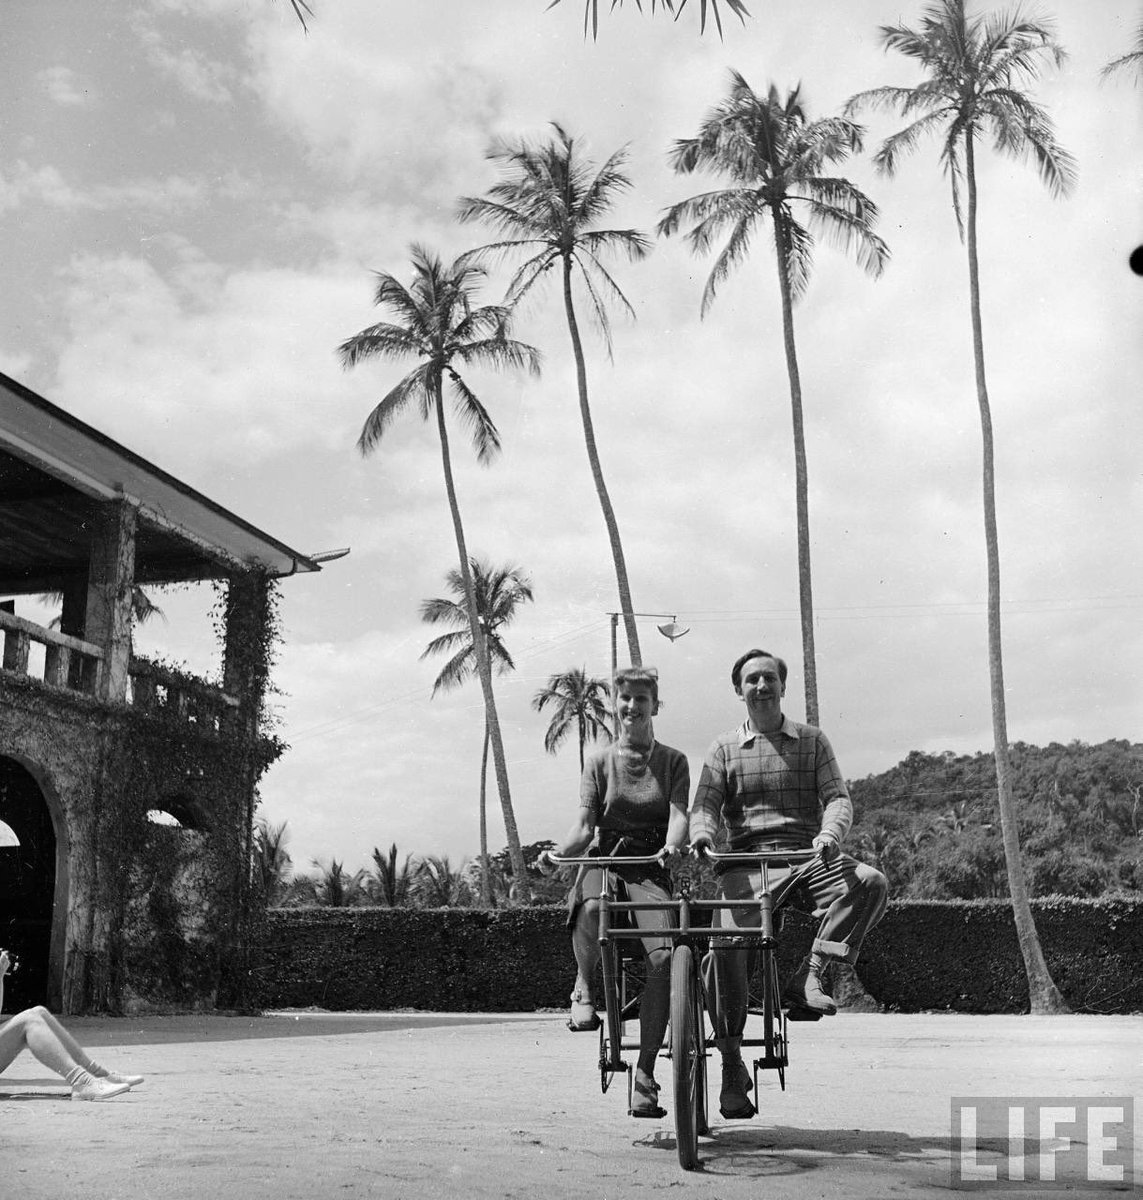 Walt Disney came to love Mary’s style and continually called on her to contribute to his films and later projects. Here they are in South America riding the best two-person bicycle ever!